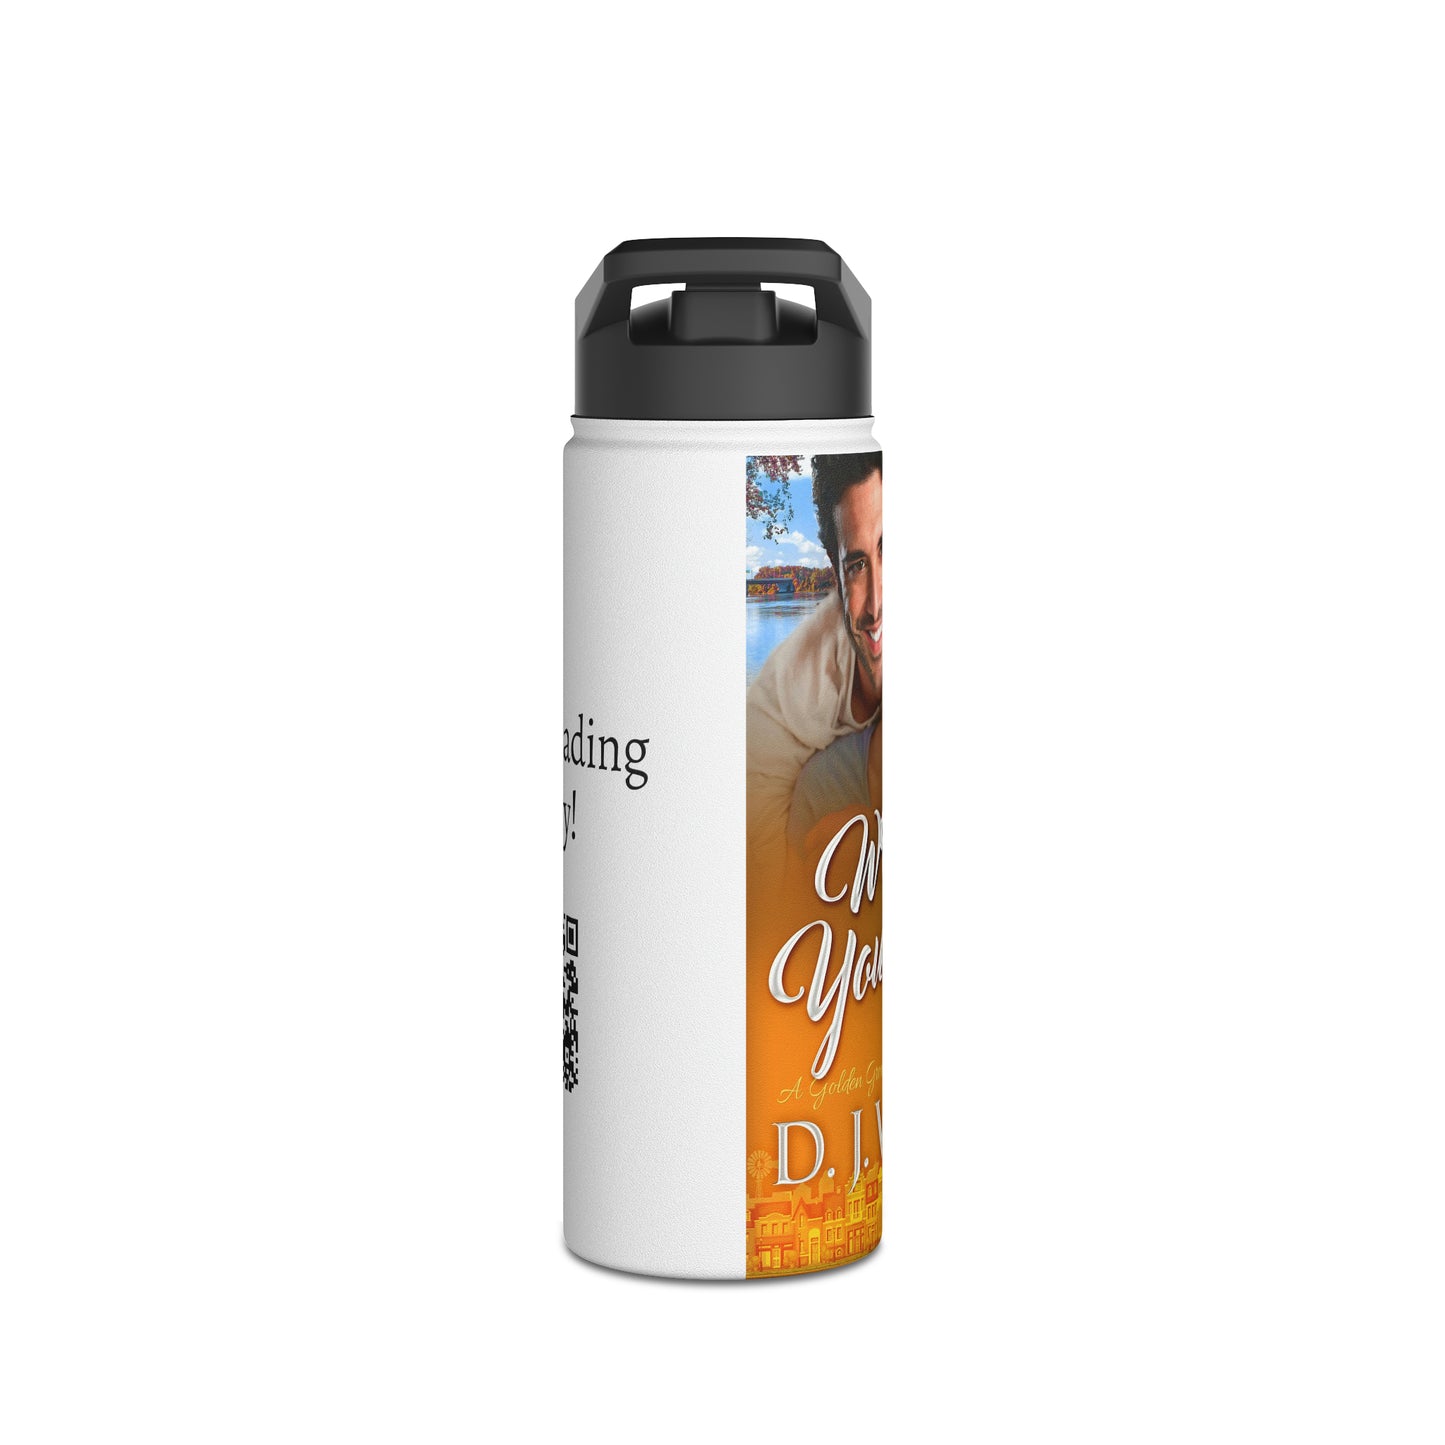 Write By Your Side - Stainless Steel Water Bottle